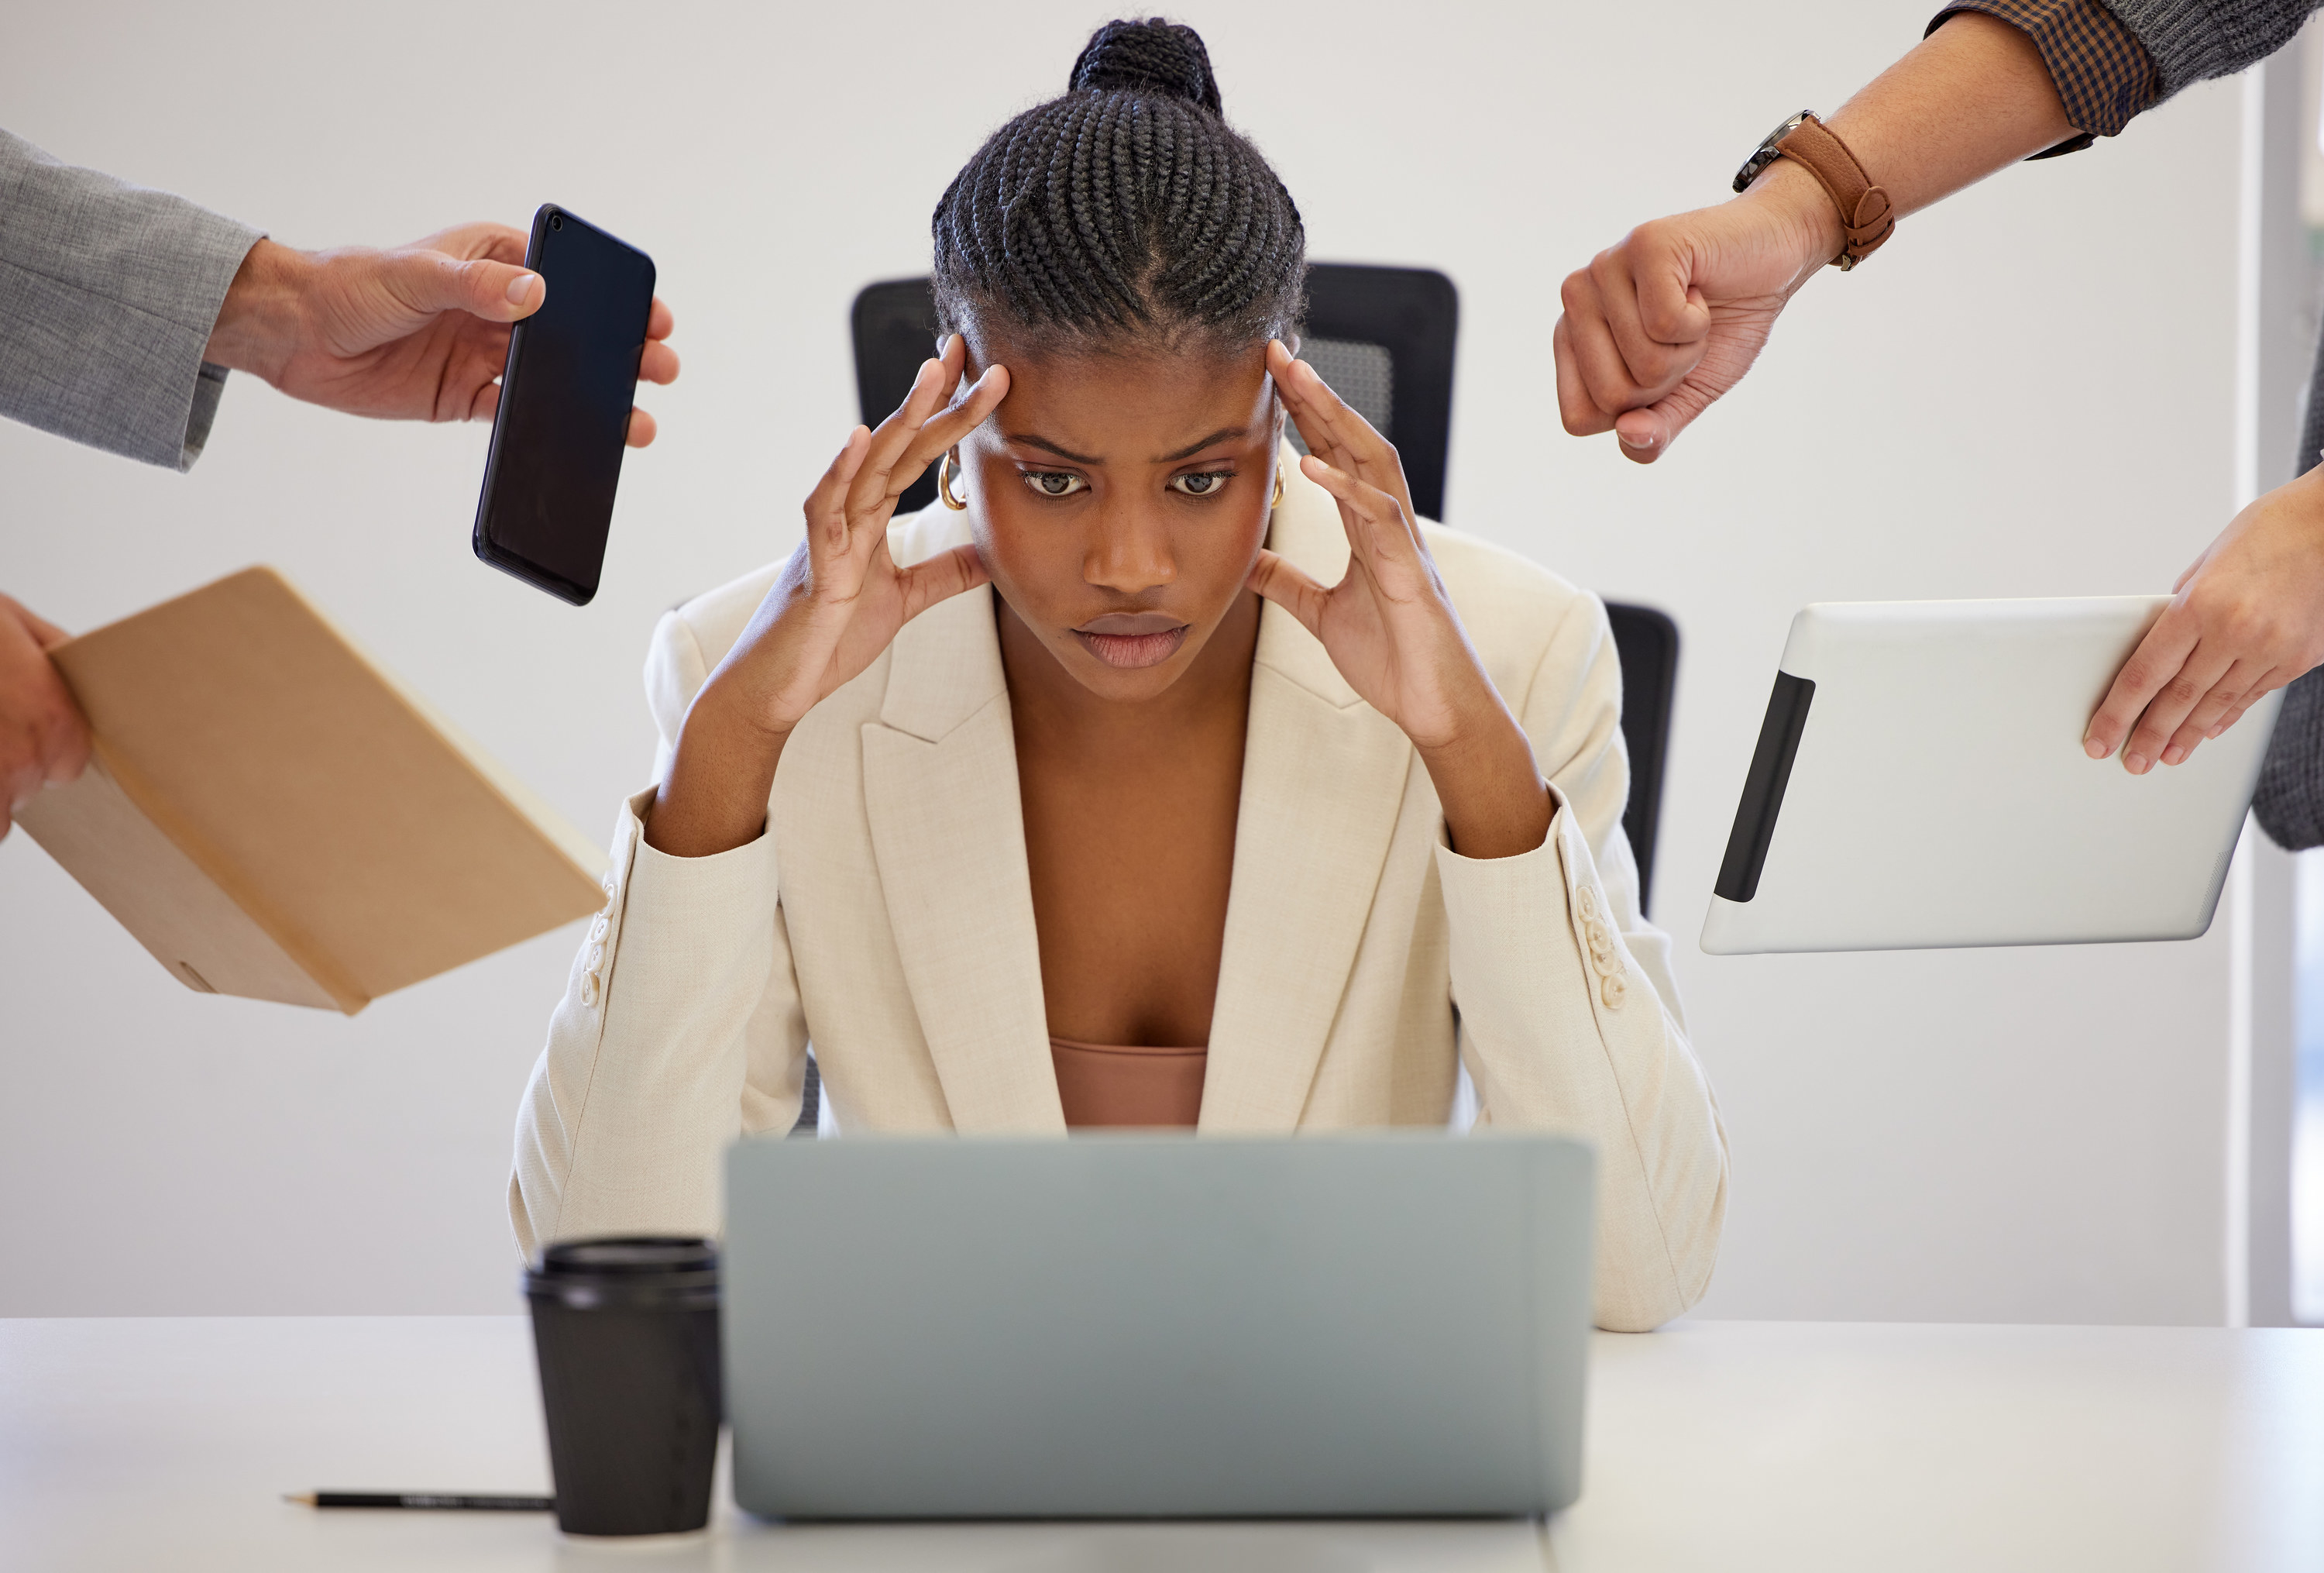 stressed woman sitting at a desk as people hand her work items from all directions